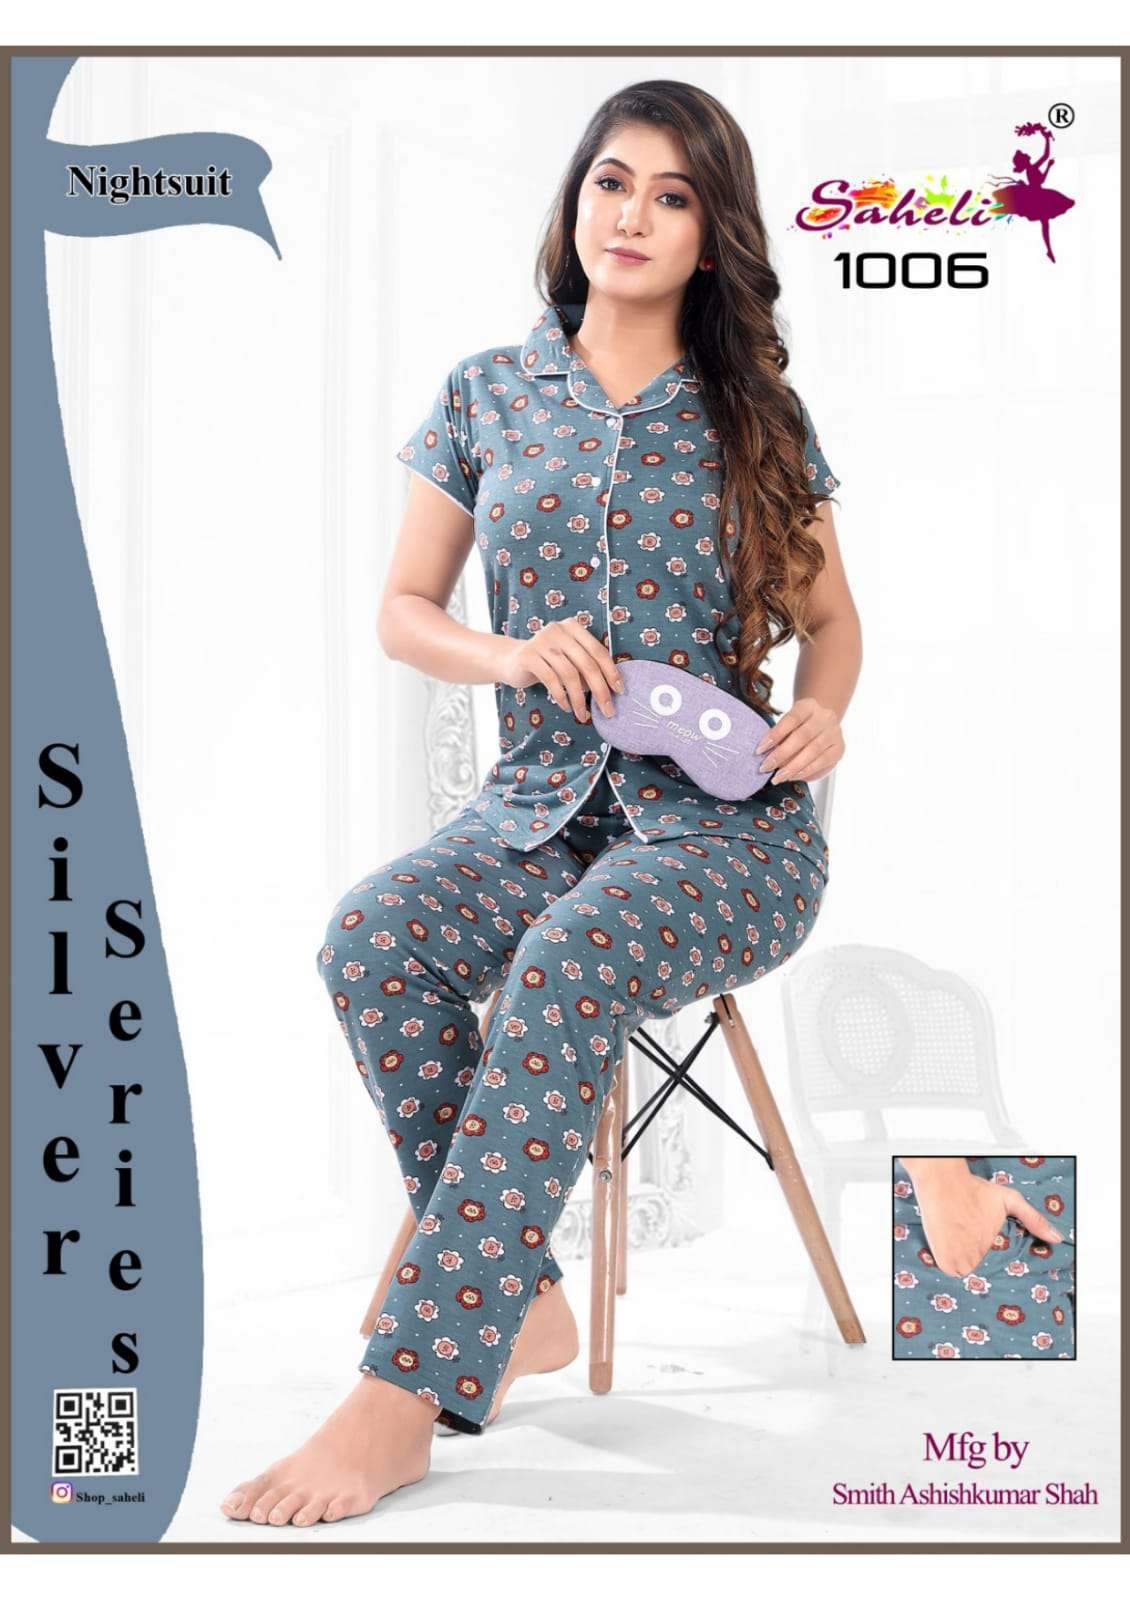 The latest collection of night suits & sleep tees size 12 | FASHIOLA INDIA